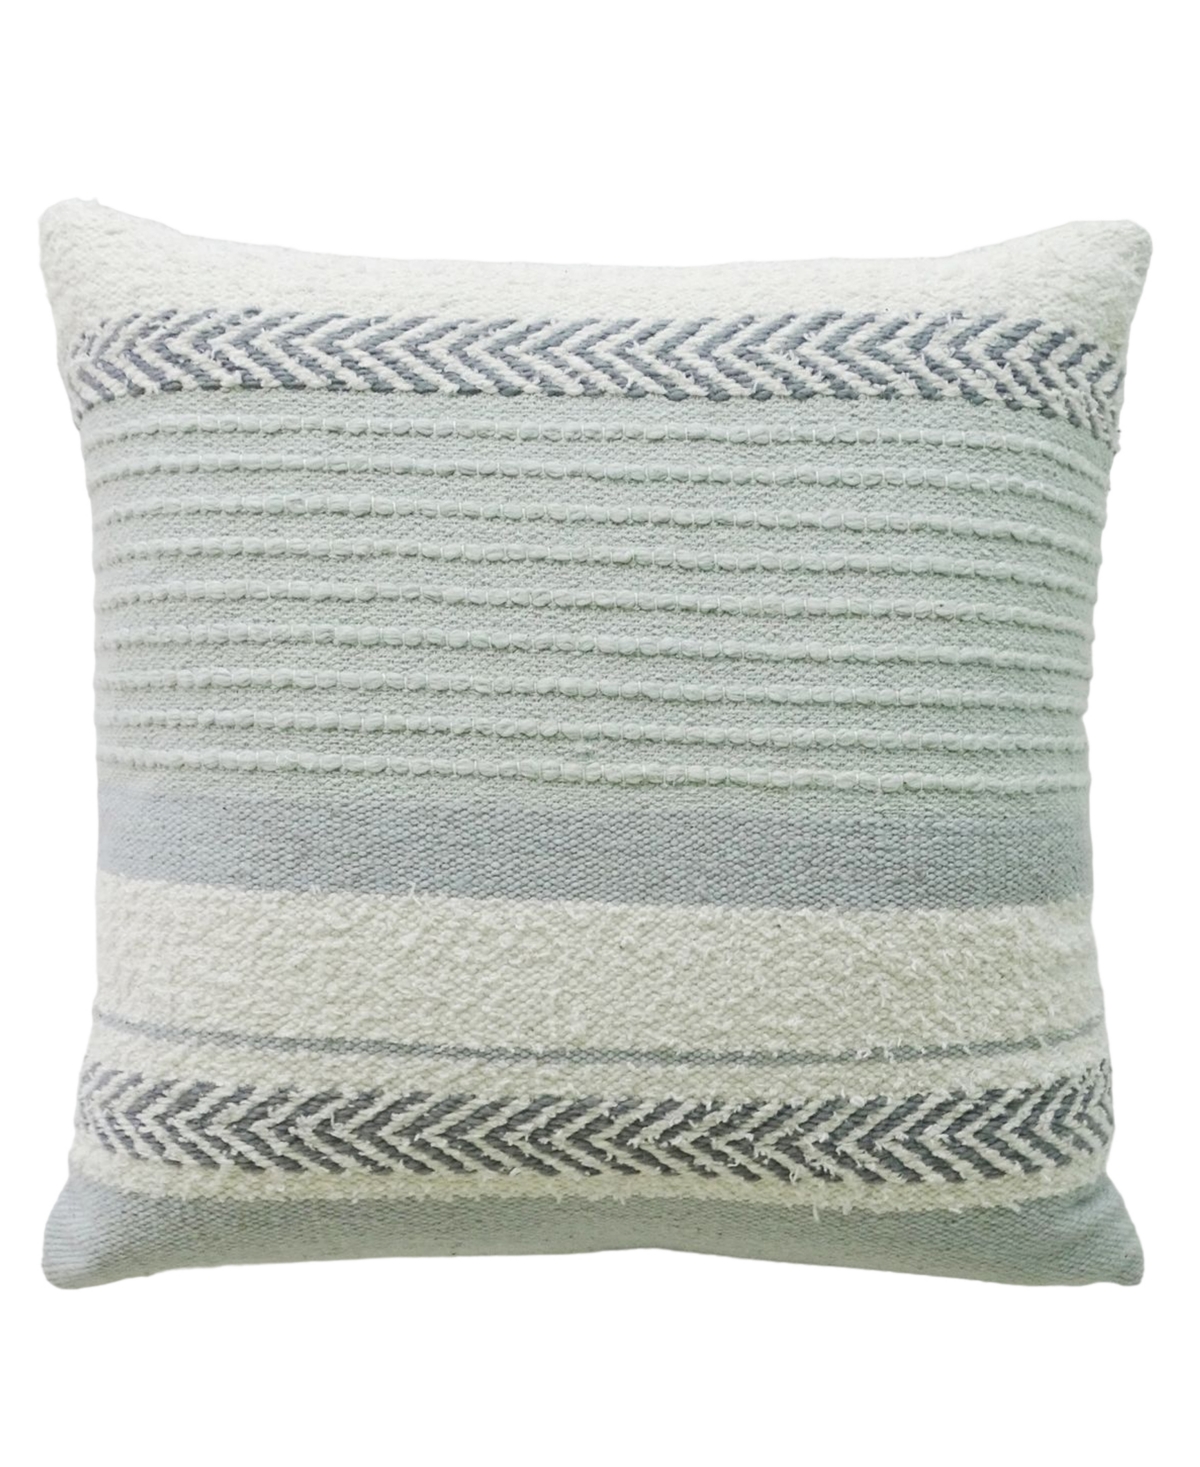 Shop Vibhsa Linden Street Handloom Woven Striped Decorative Pillow, 20" X 20" In Multi Color